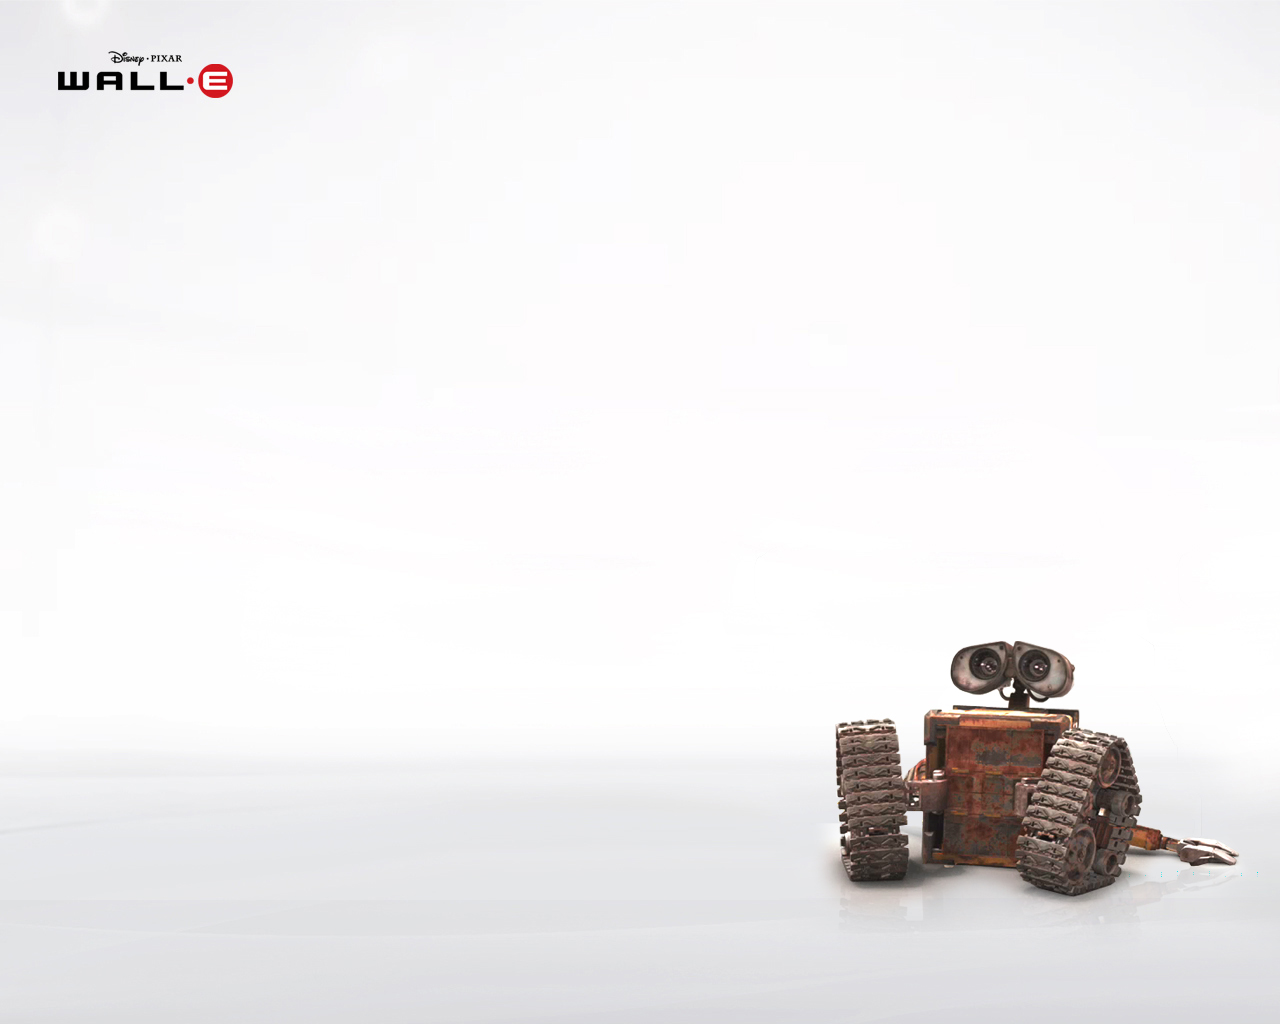 Download High quality WALL-E wallpaper / Movies / 1280x1024